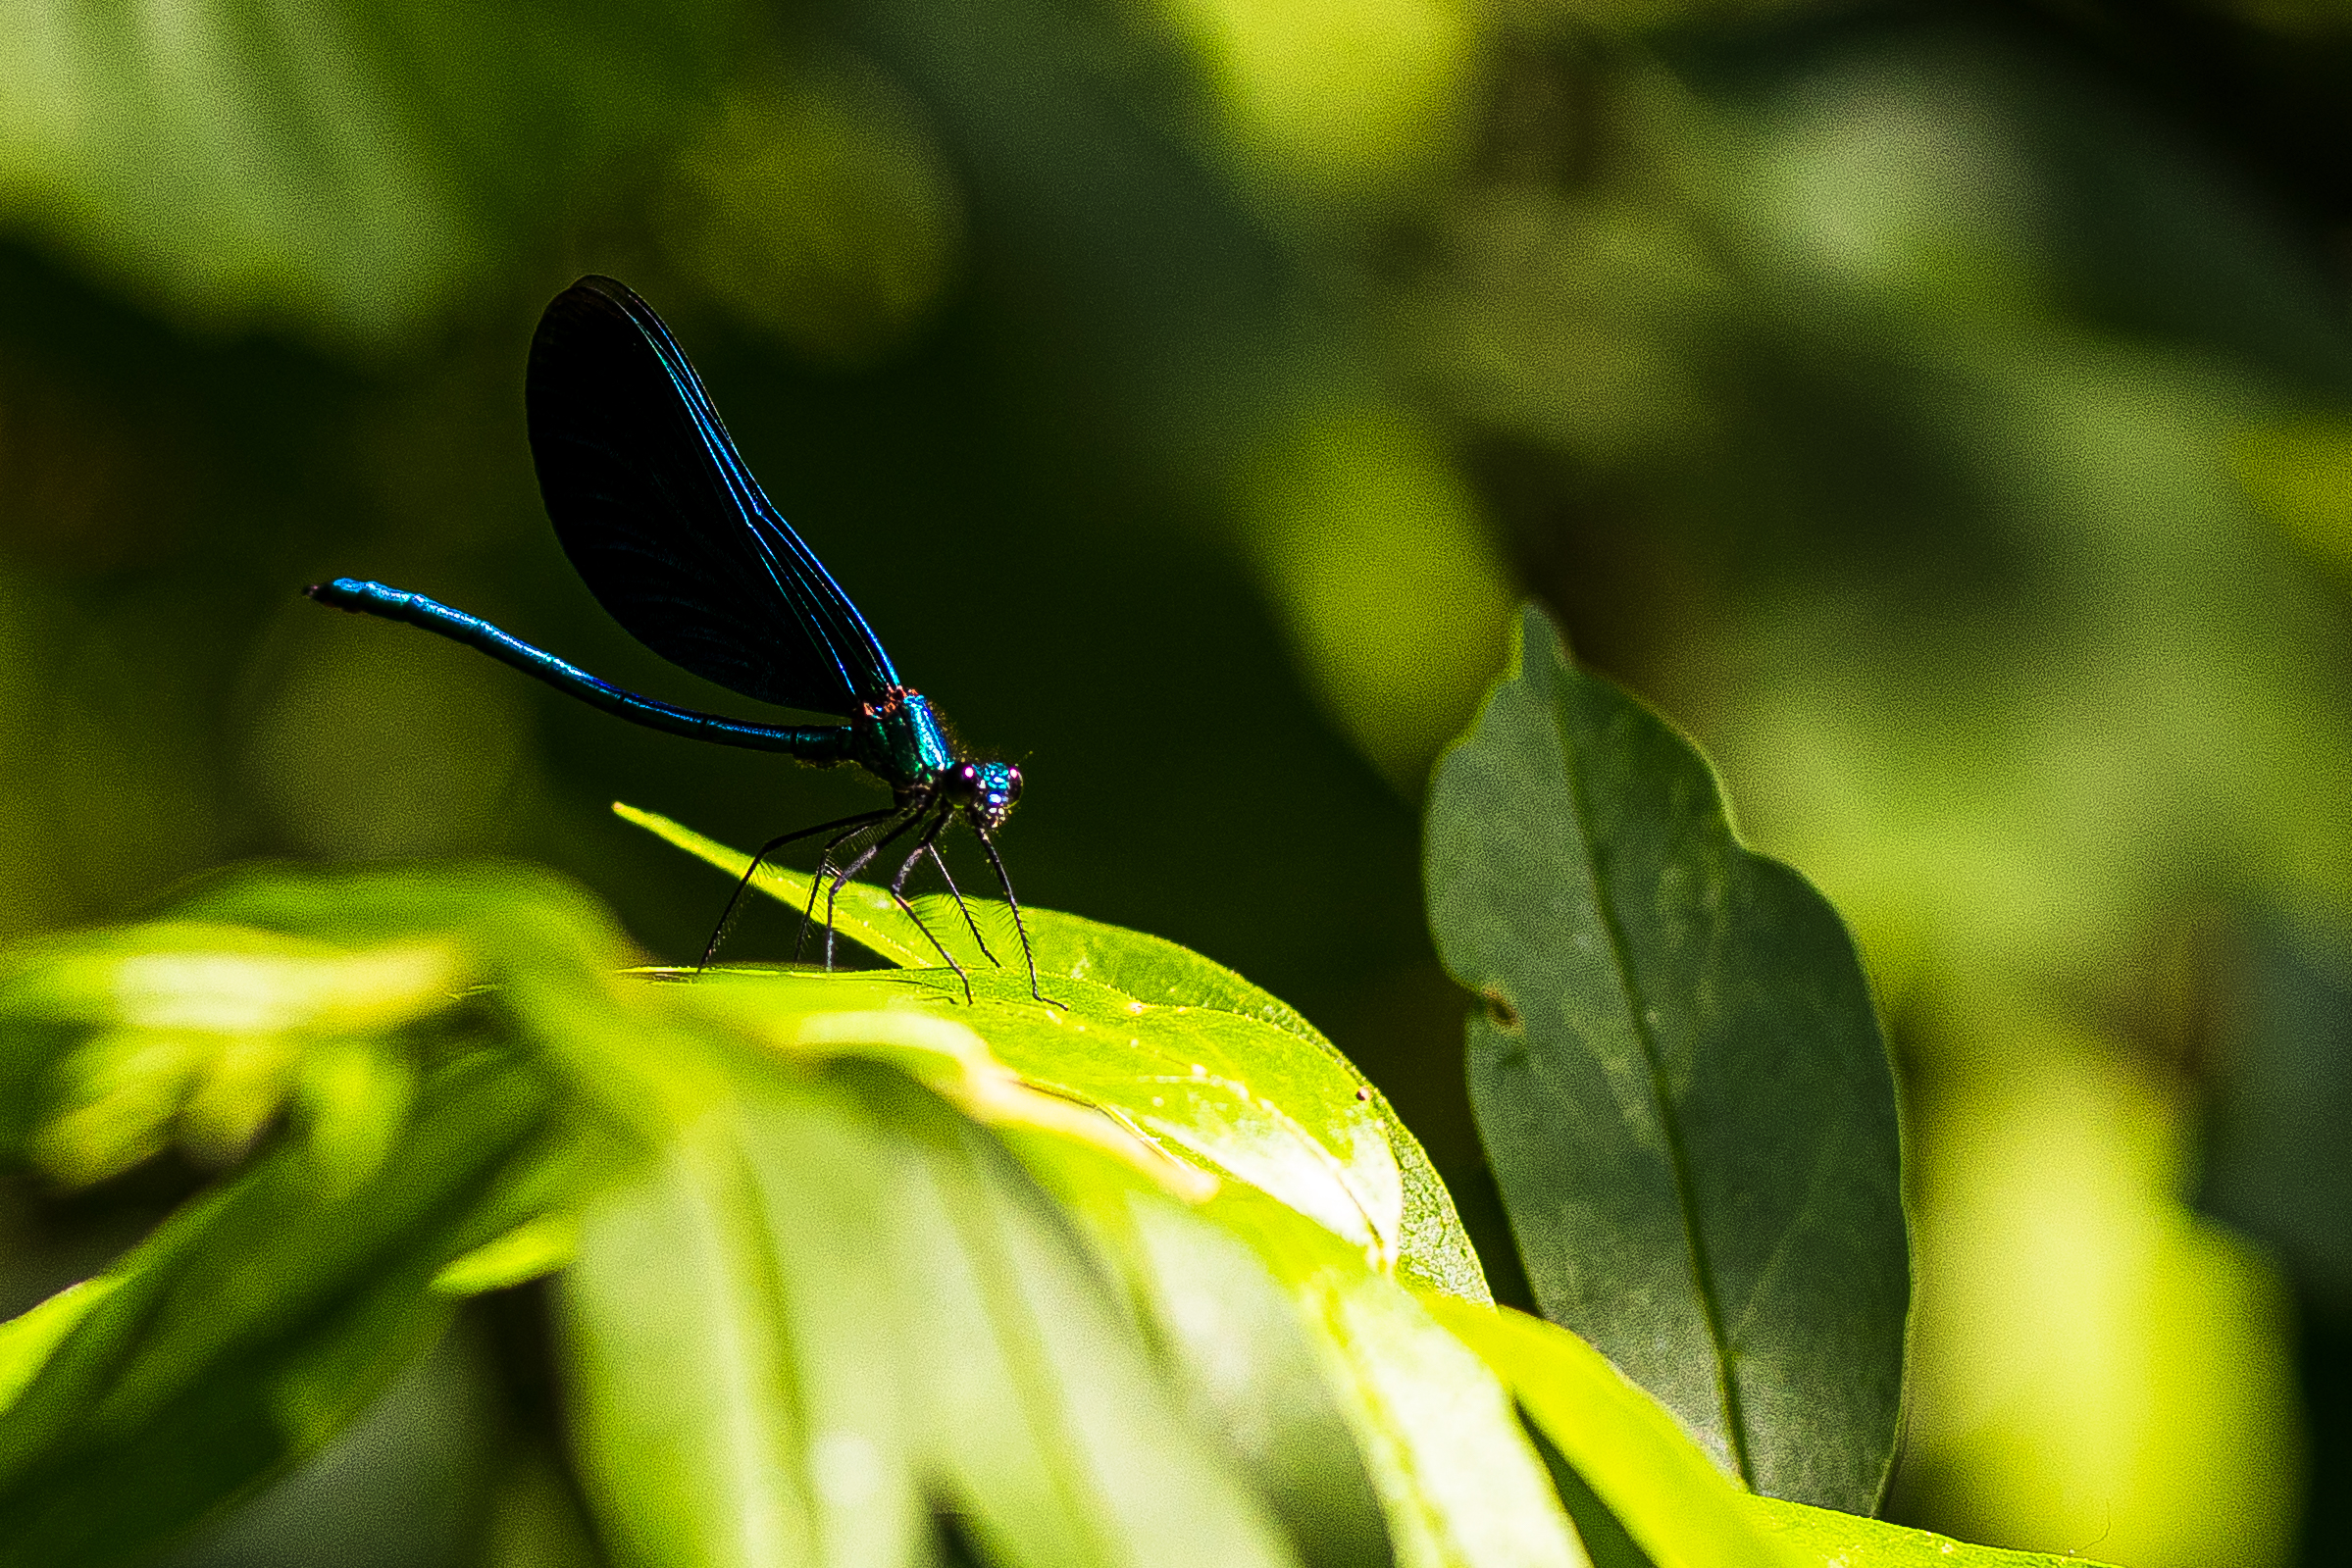 Close-up of a blue damselfly on a green leaf.